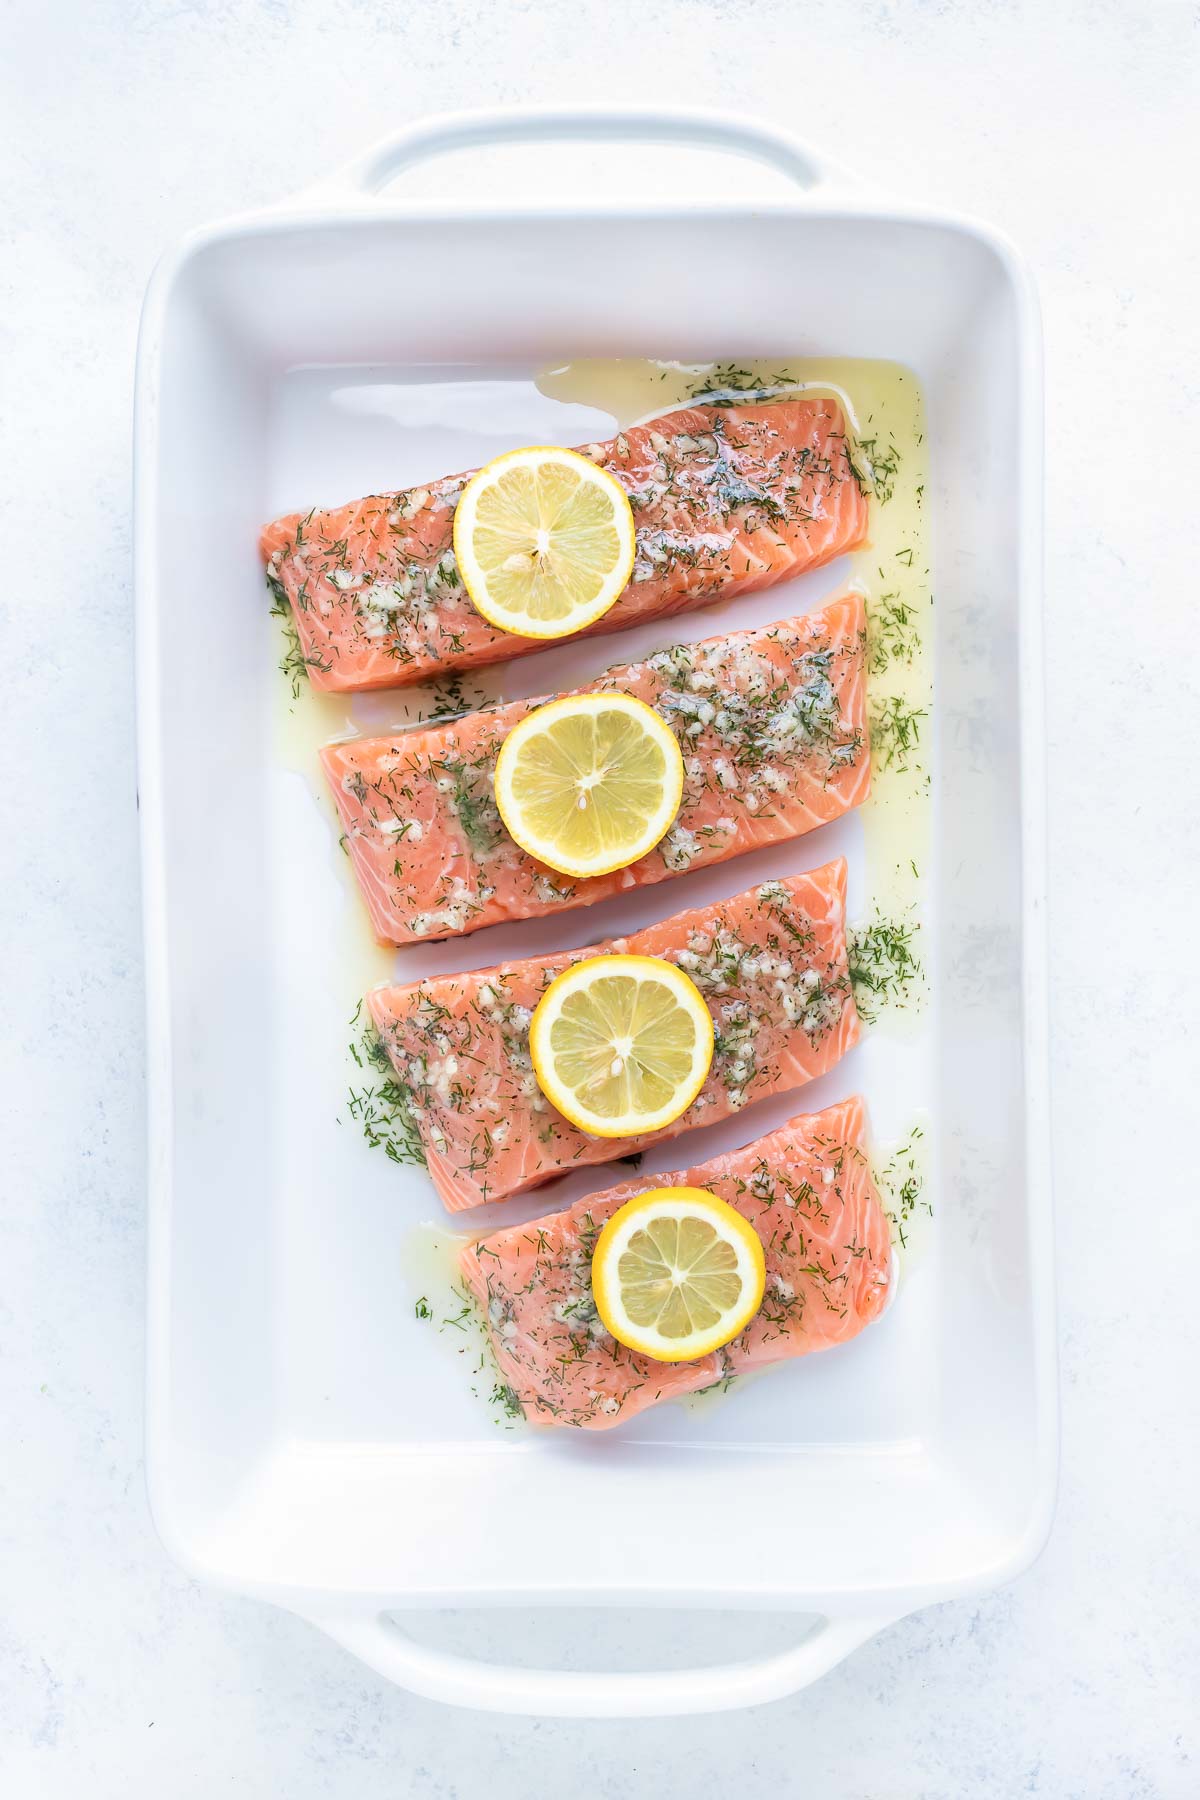 Salmon is topped with butter, lemon, dill, and seasonings.